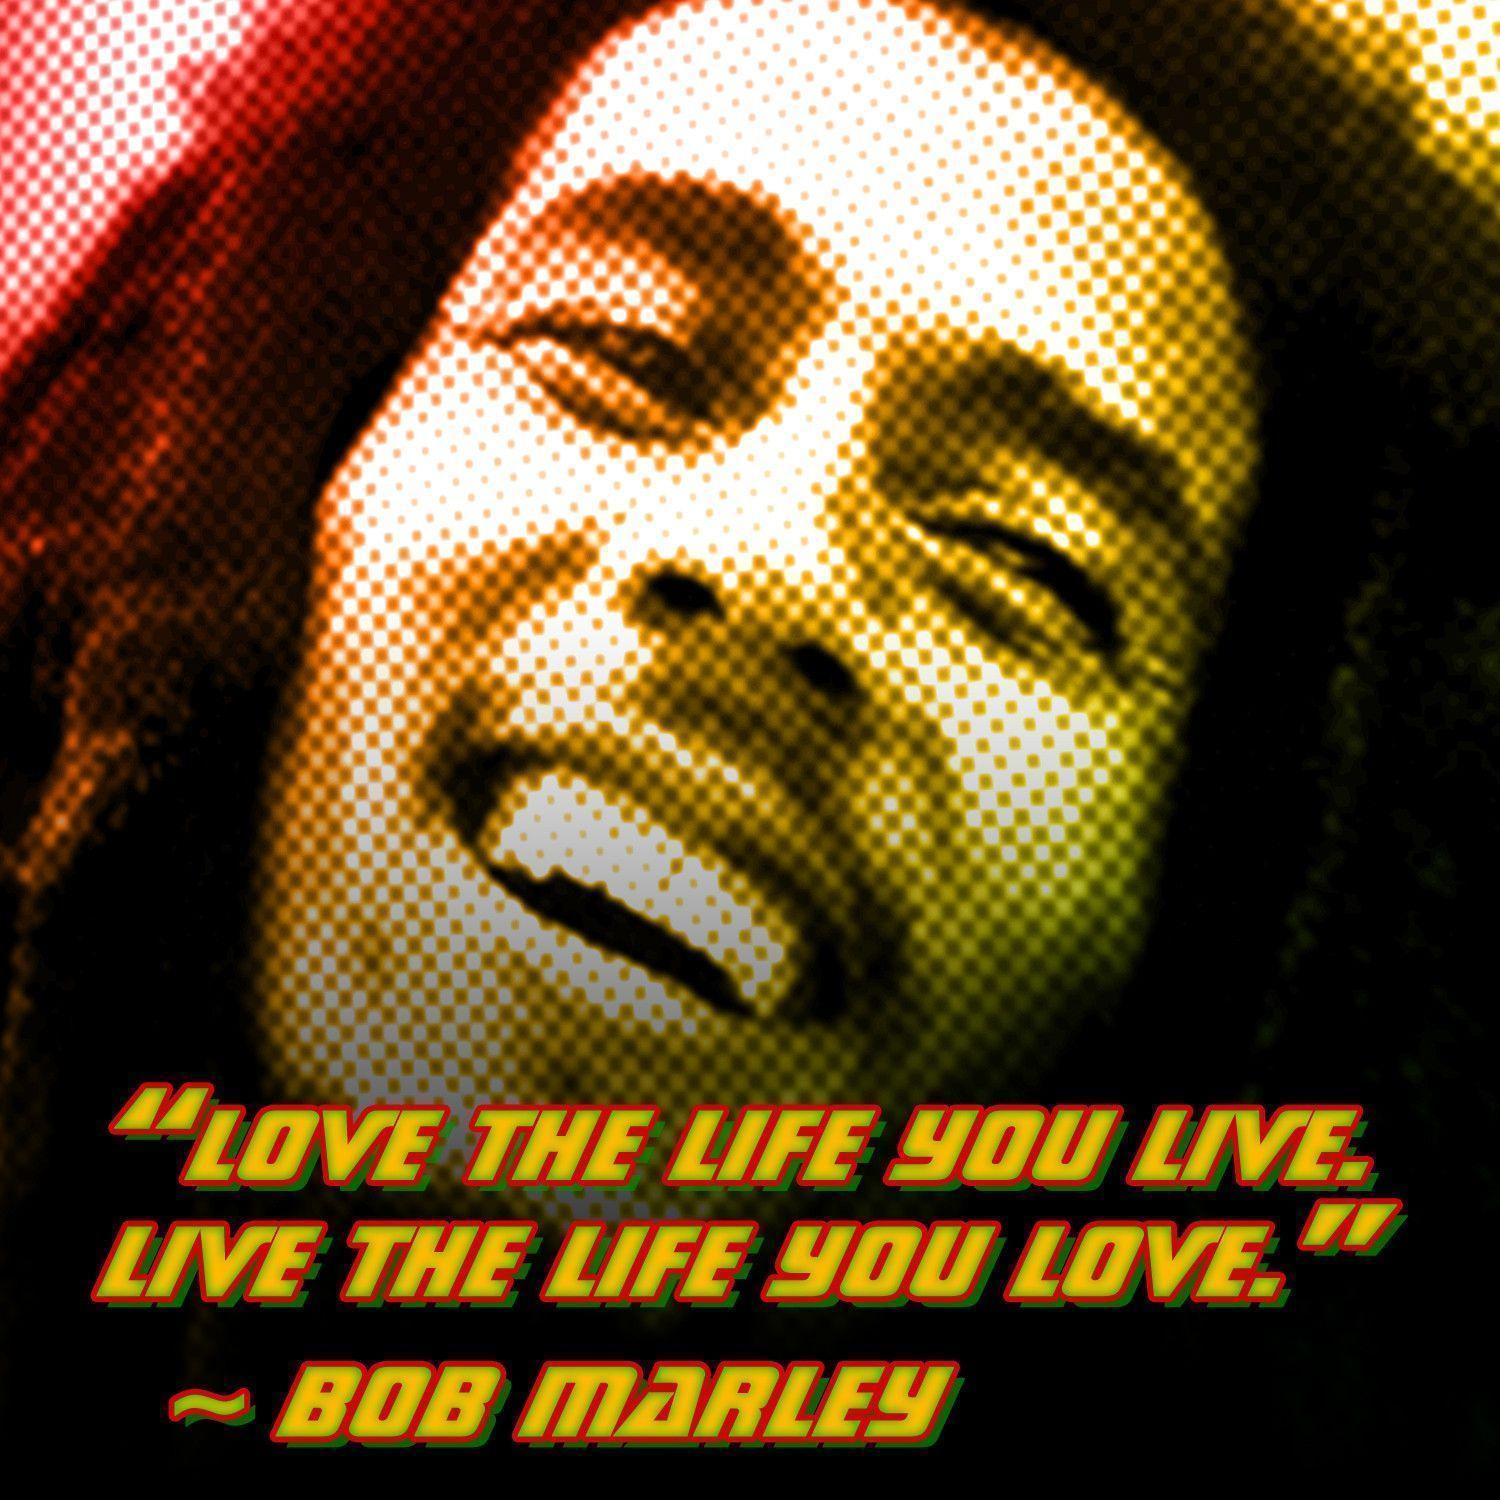 Bob Marley Quotes Free Download in Quotes of Bob Marley Wallpaper